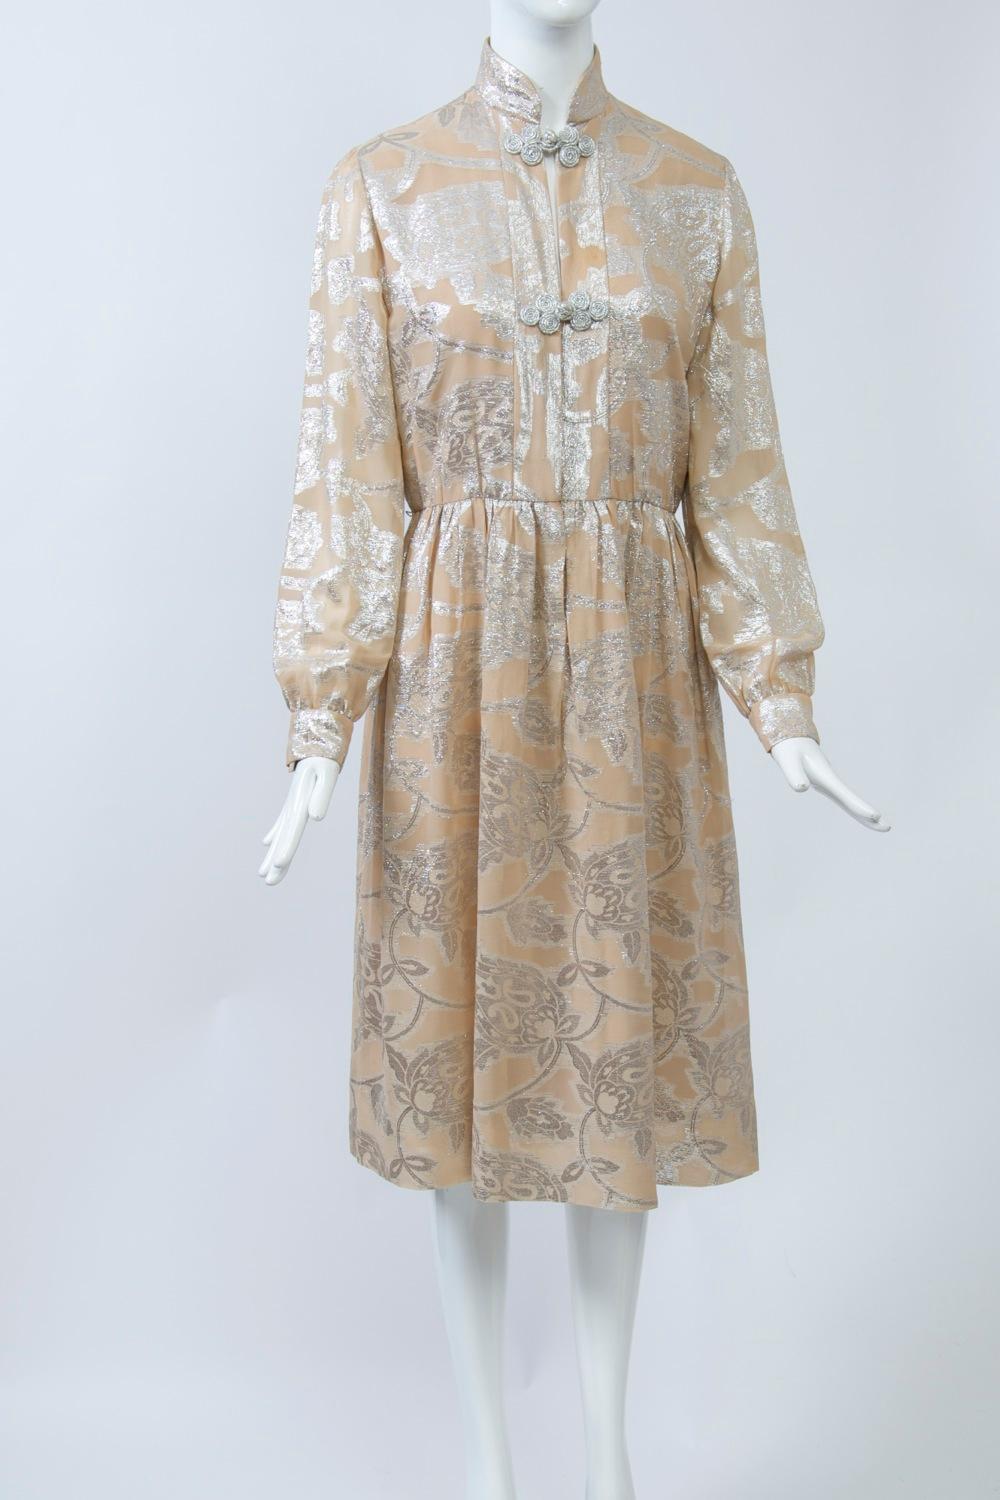 Oscar de la Renta dress c.1970 crafted of a sheer beige fabric shot through with silver metallic thread in a large abstract floral pattern. Modified shirtwaist style with front opening that featrues 2 silver thread frog closures, one at the mandarin